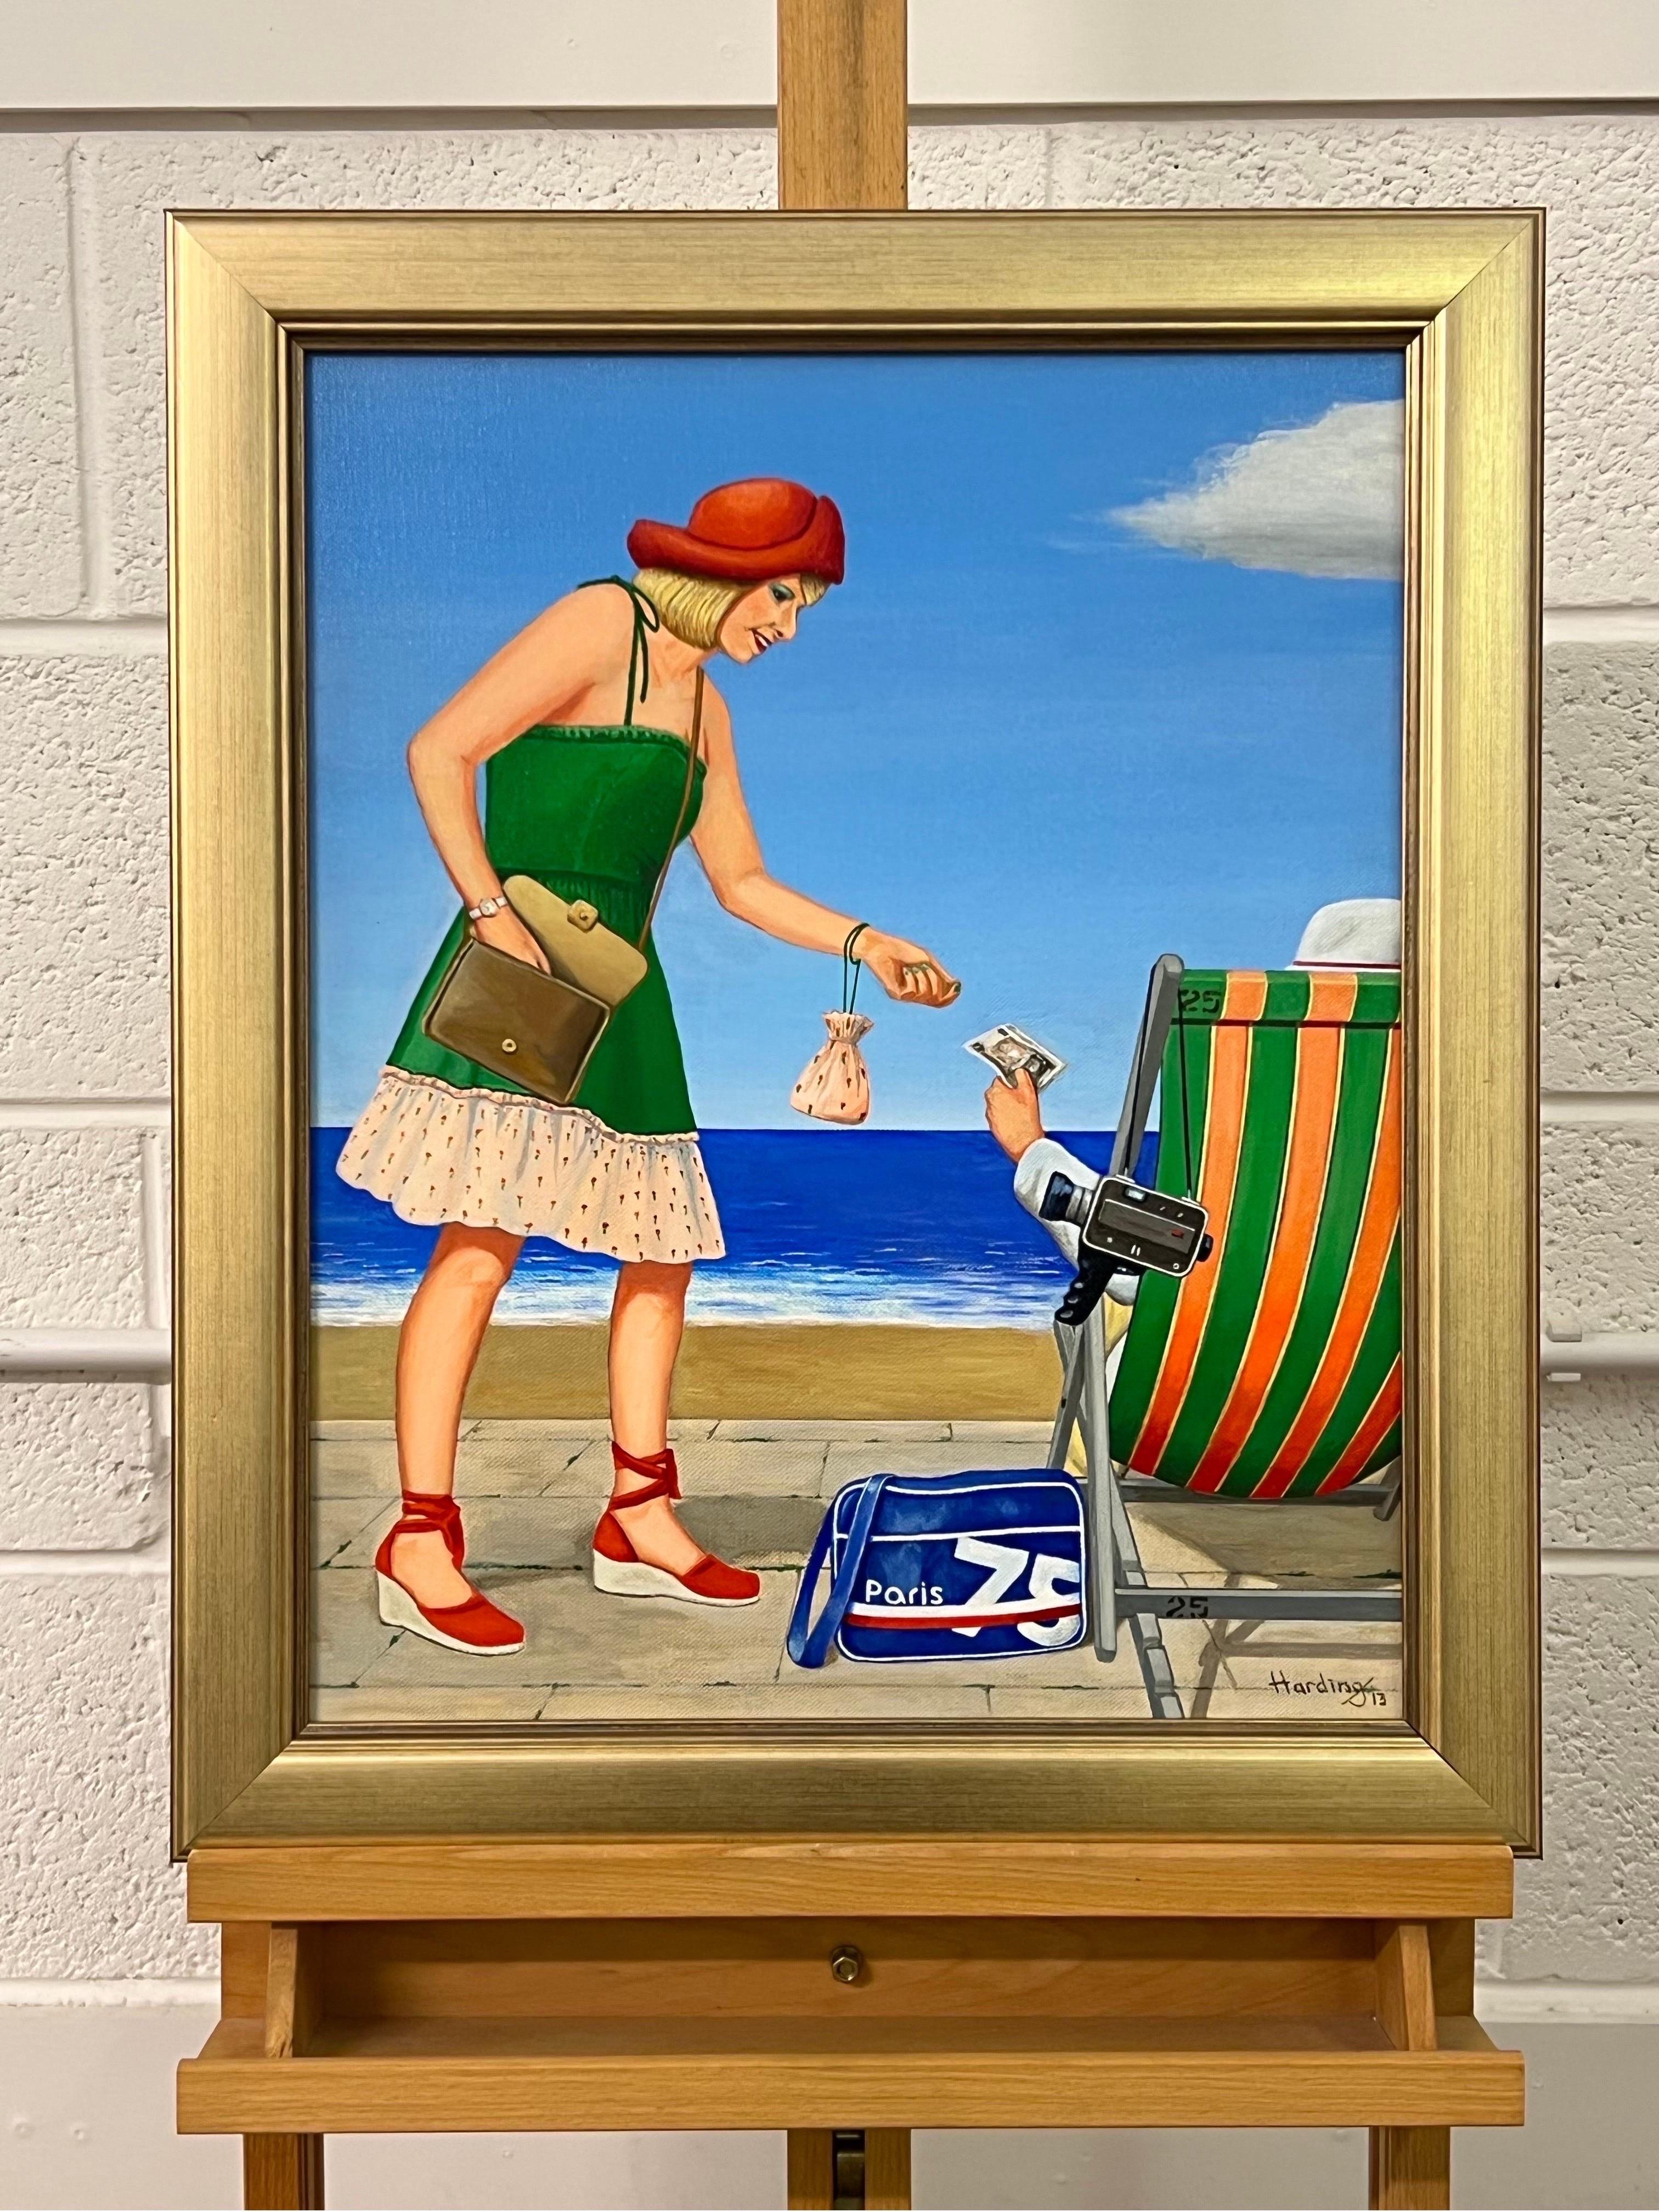 Vintage English Woman at a Seaside Beach Resort in Summer 1960's 1970's England - English School Painting by Paul F Harding